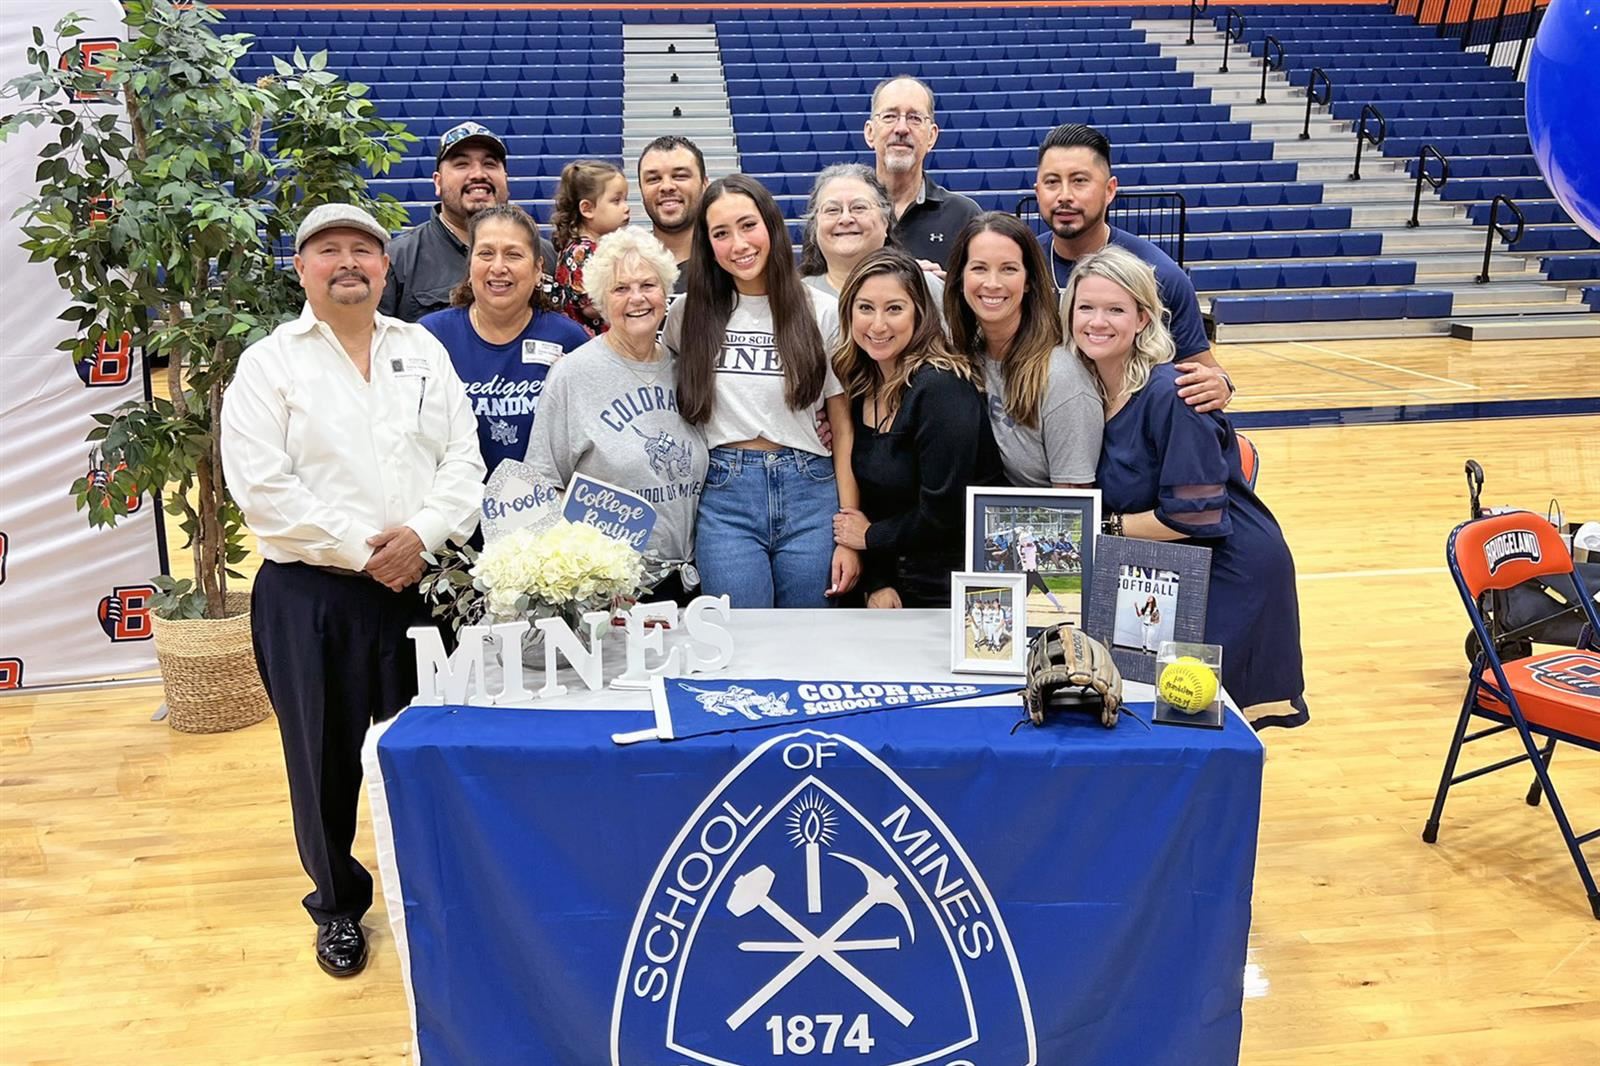 Bridgeland High School senior Brooke Gonzales, center, poses with family after signing a letter of intent to play softball.